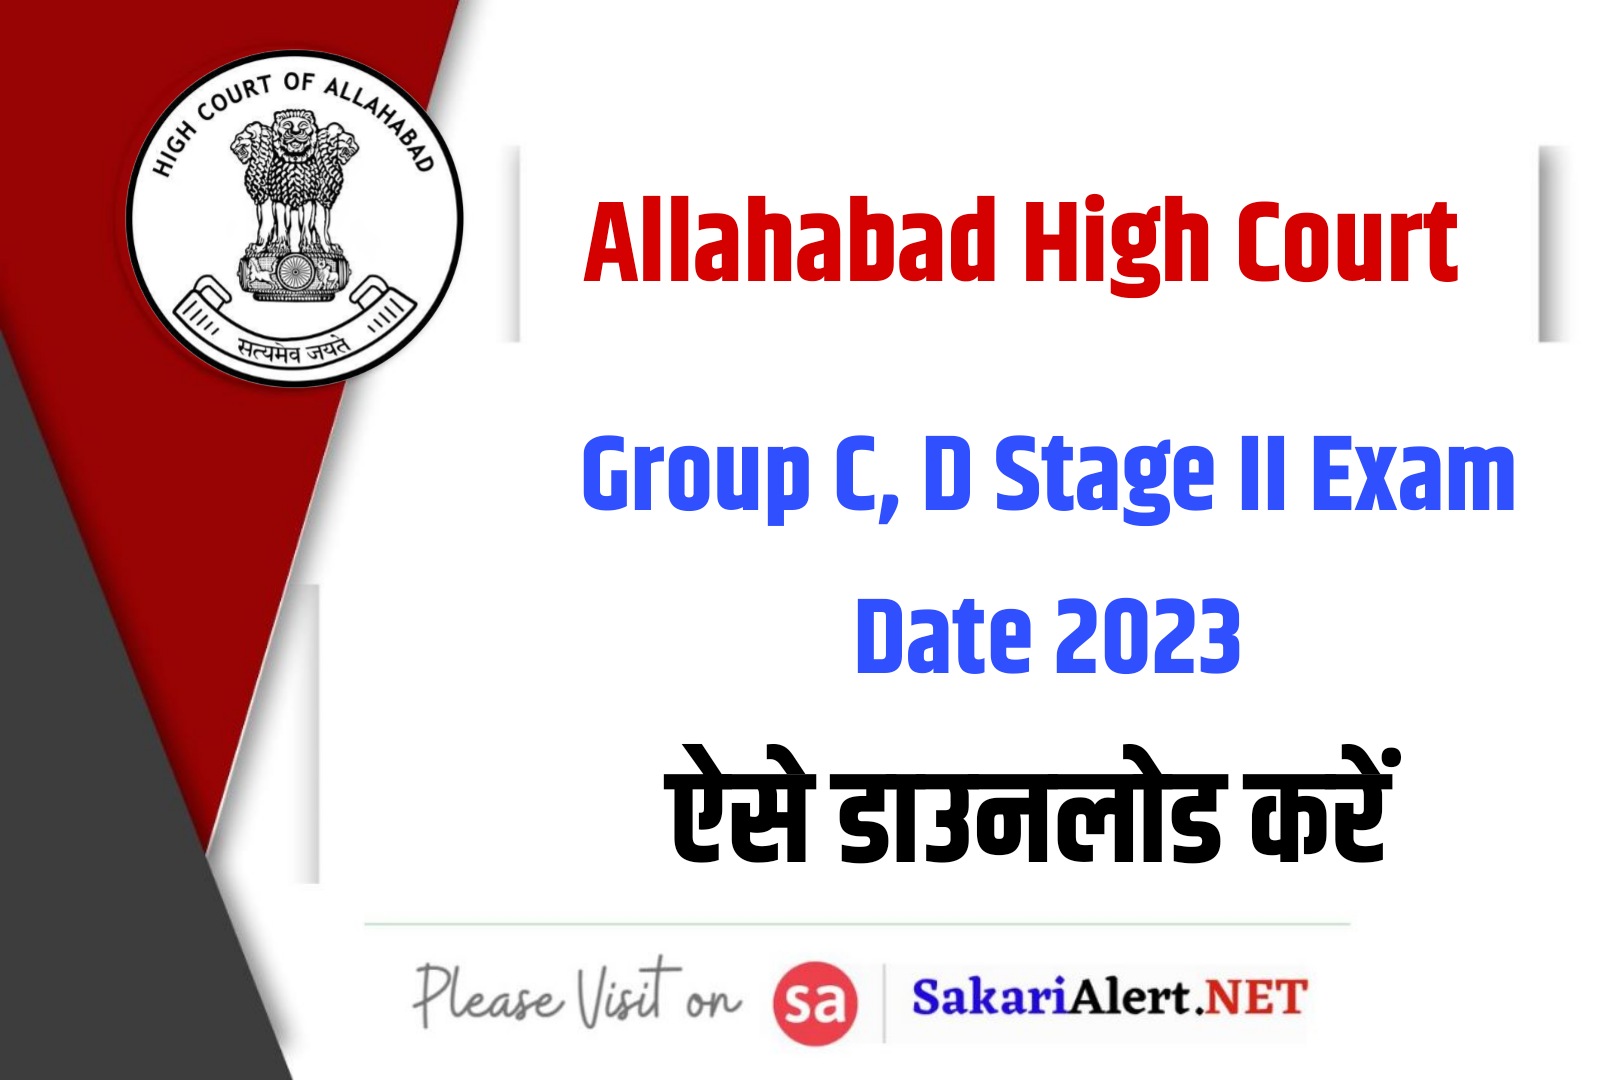 Allahabad High Court Group C, D Stage II Exam Date 2023